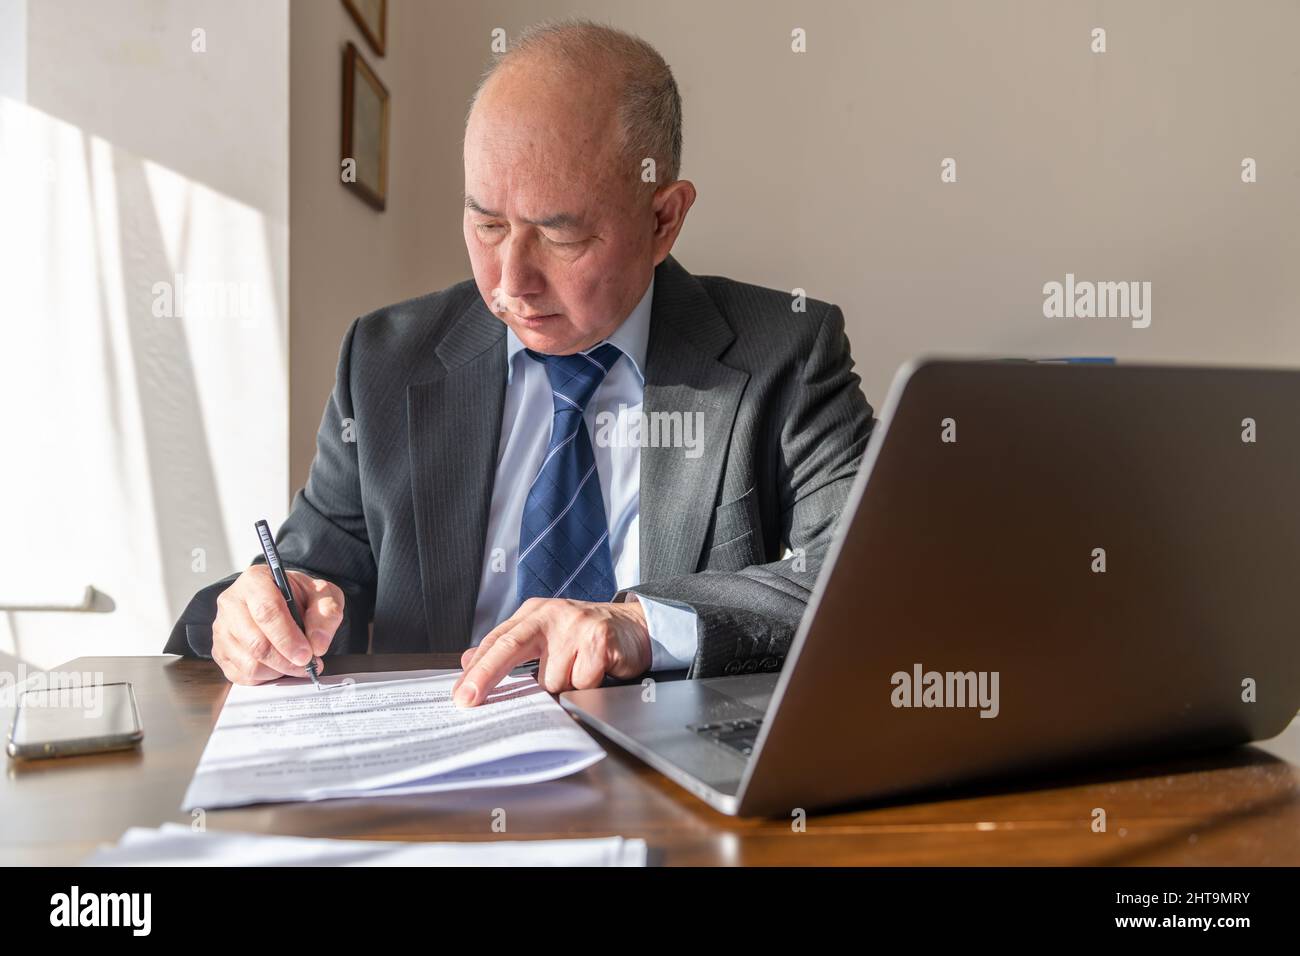 A senior executive signing a document in the office. Work, office concept. Stock Photo